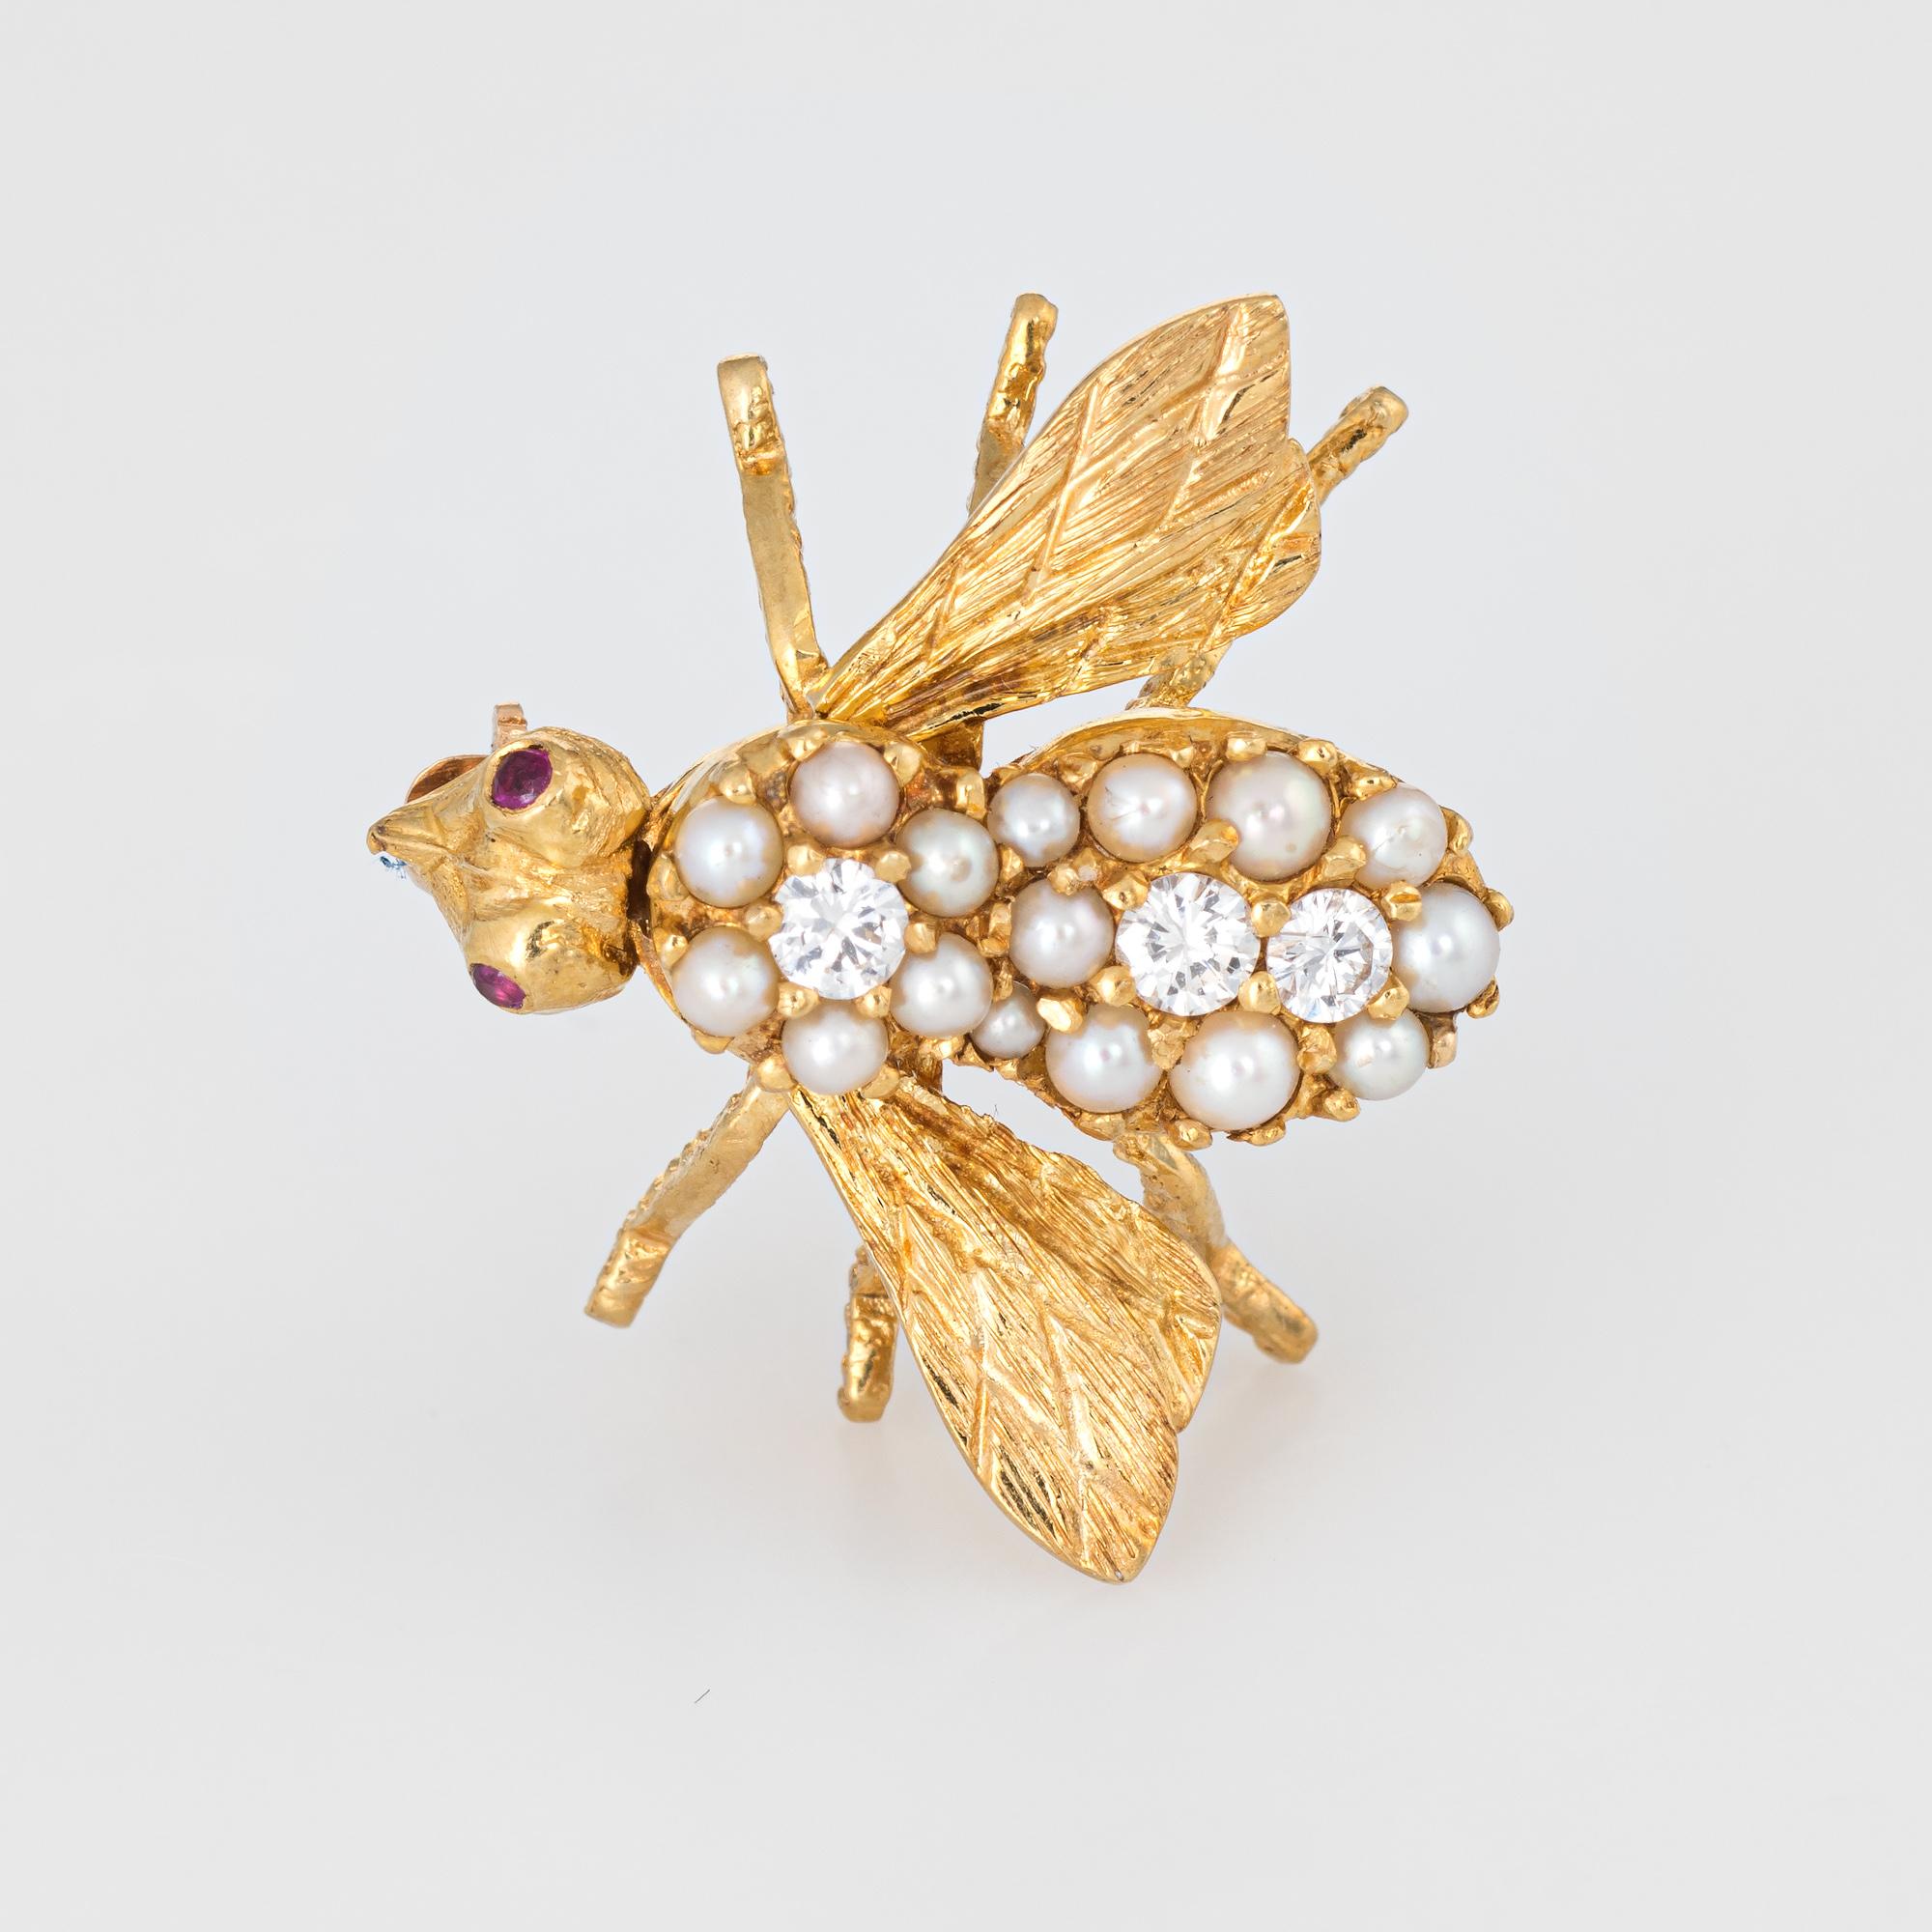 Finely detailed vintage Herbert Rosenthal diamond & pearl bee brooch (circa 1970s) crafted in 18 karat yellow gold. 

Round brilliant cut diamonds are estimated at 0.05 carats each. The total diamond weight is estimated at 0.15 carats (estimated at